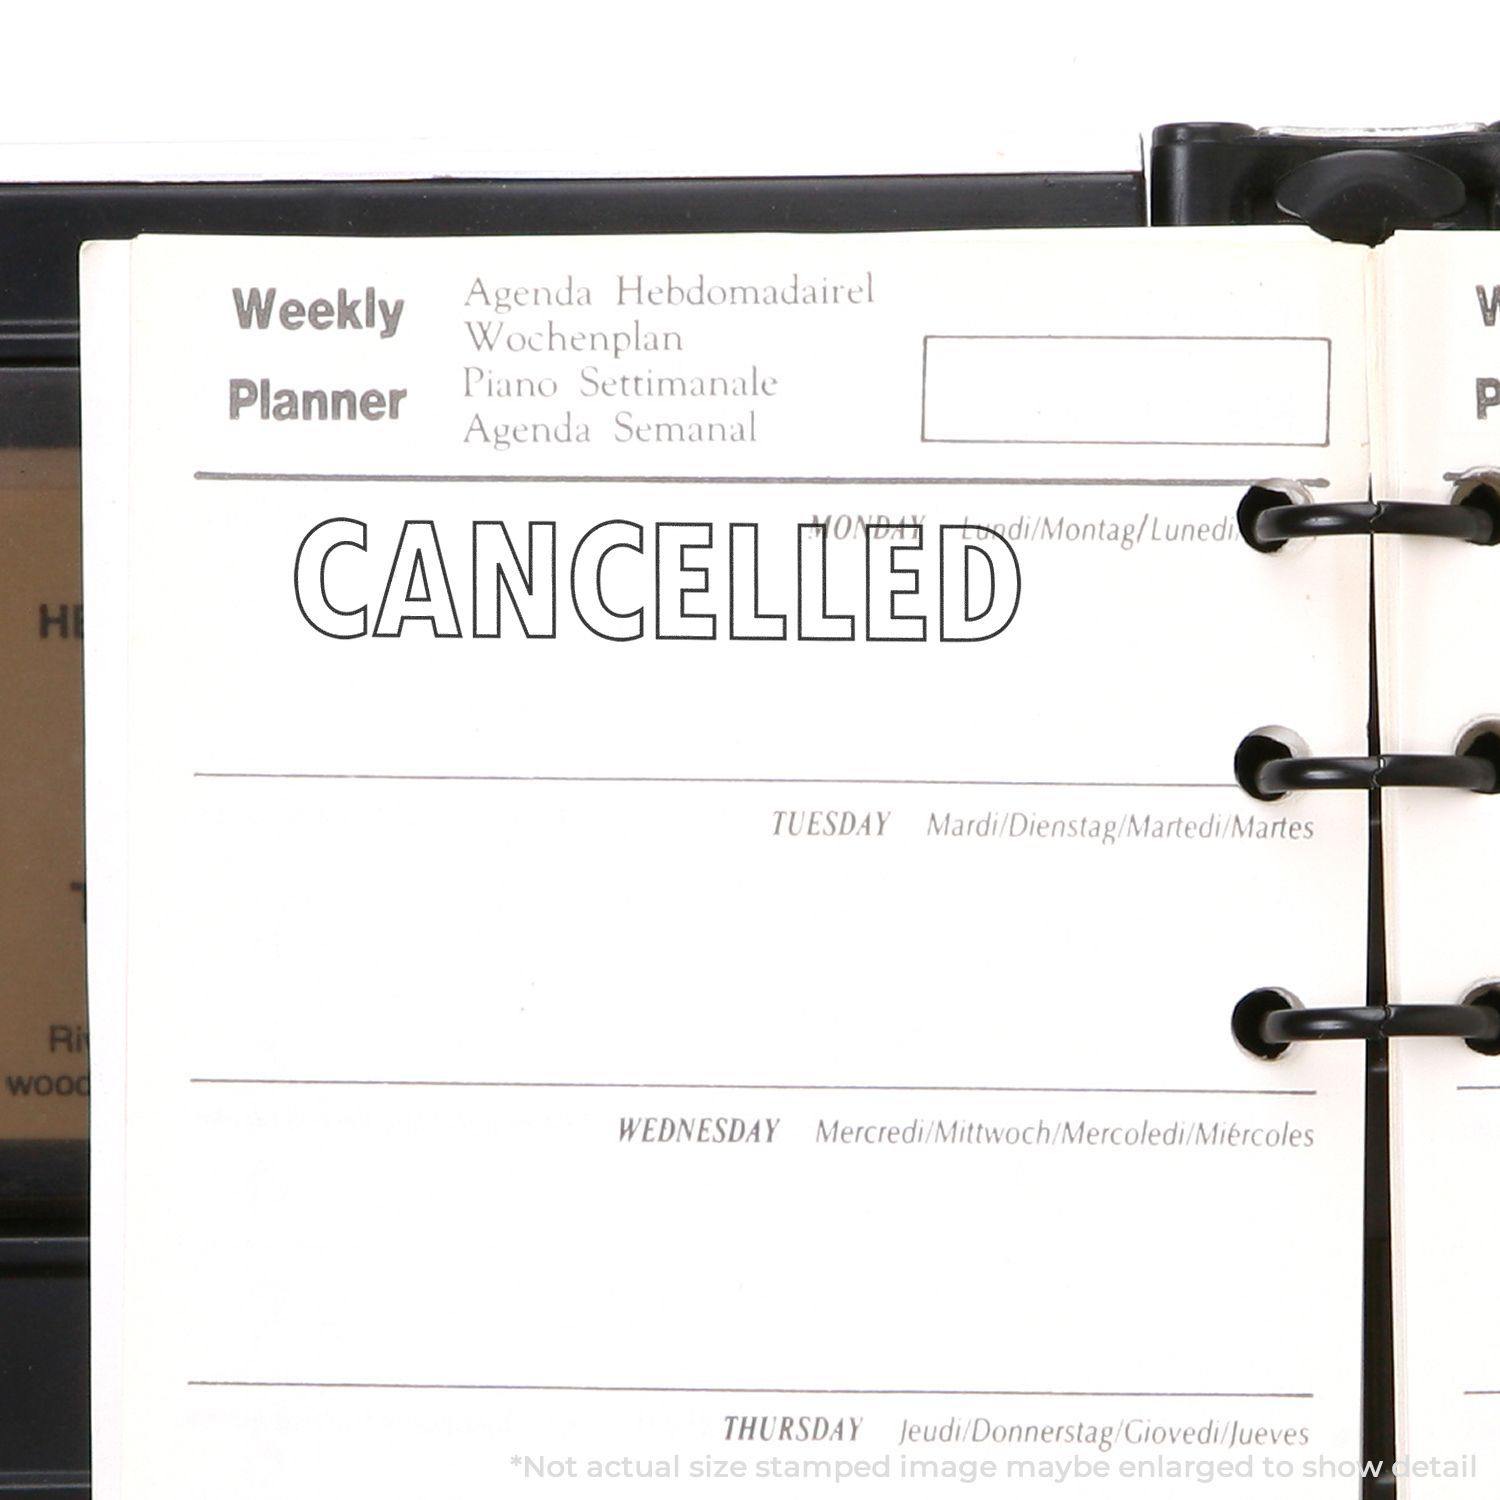 A stock office rubber stamp with a stamped image showing how the text "CANCELLED" in an outline font is displayed after stamping.